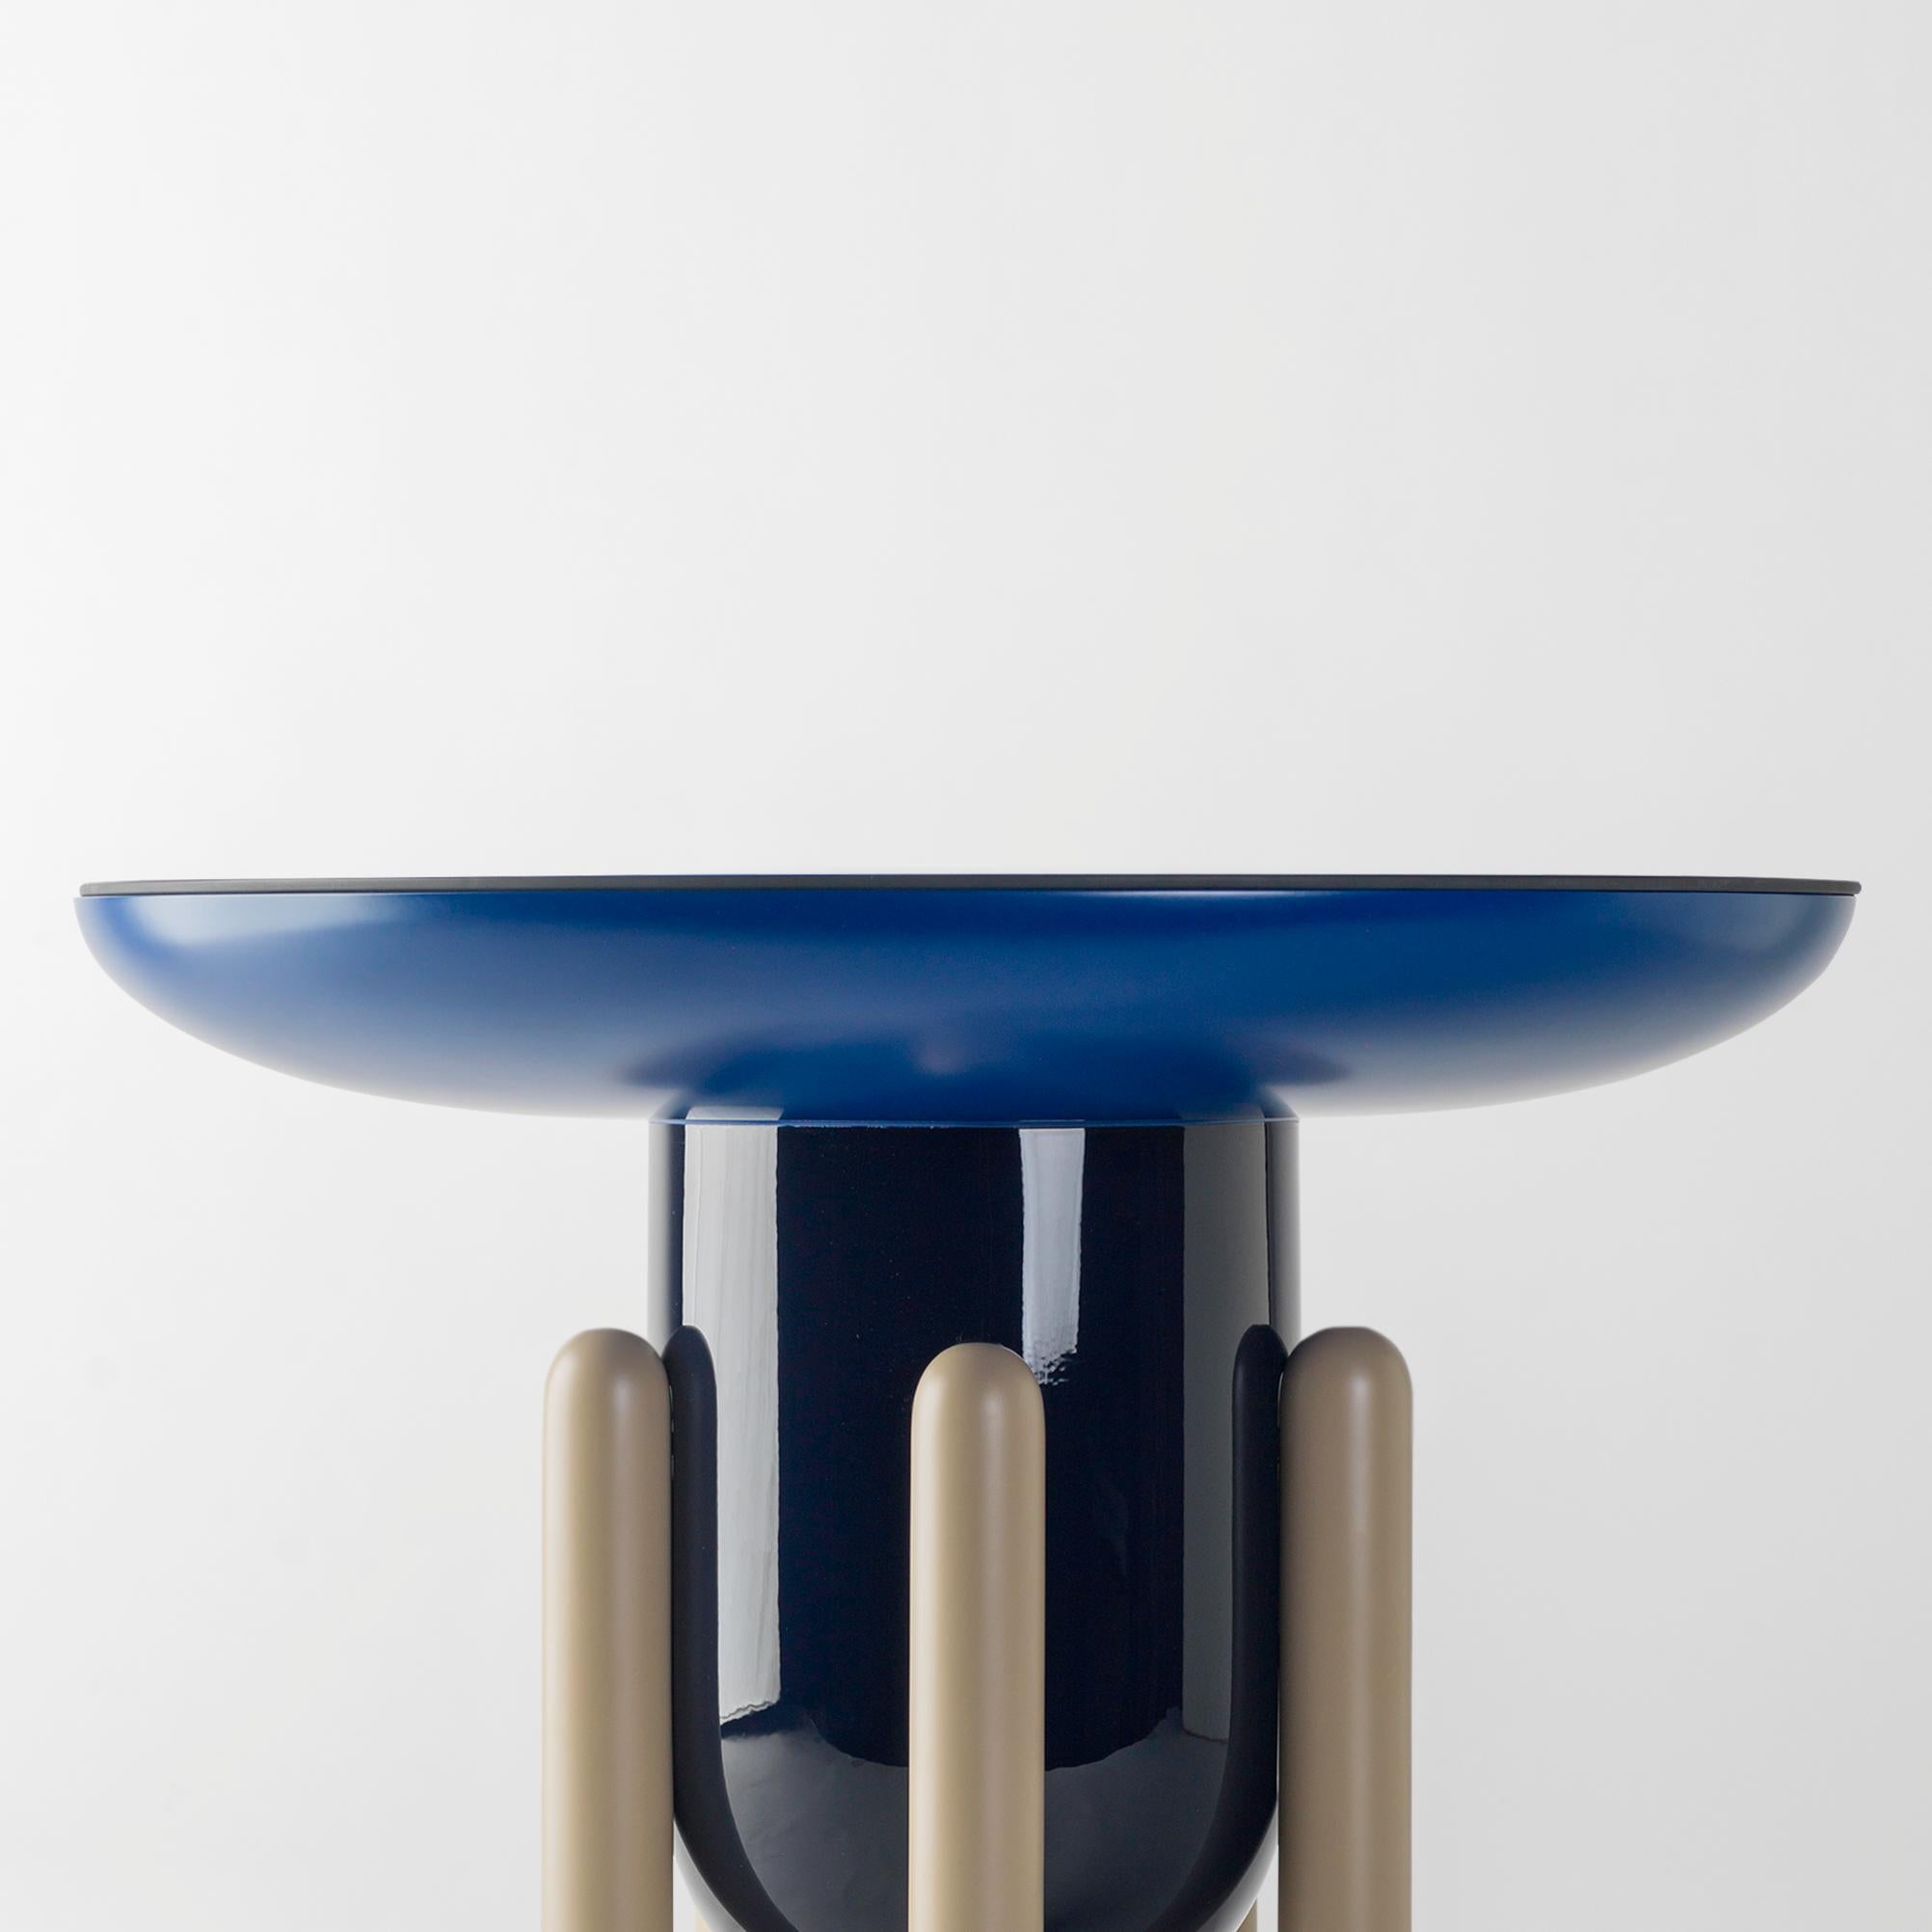 Multi-color explorer # 02 table

Design by Jaime Hayon, 2019
Manufactured by BD Barcelona.

Lacquered fibreglass body. Solid turned wooden legs and lacquered. Painted glass tabletop.

Measures: 60 Ø x 46 cm

- Glass: RAL 7021
- Top: RAL